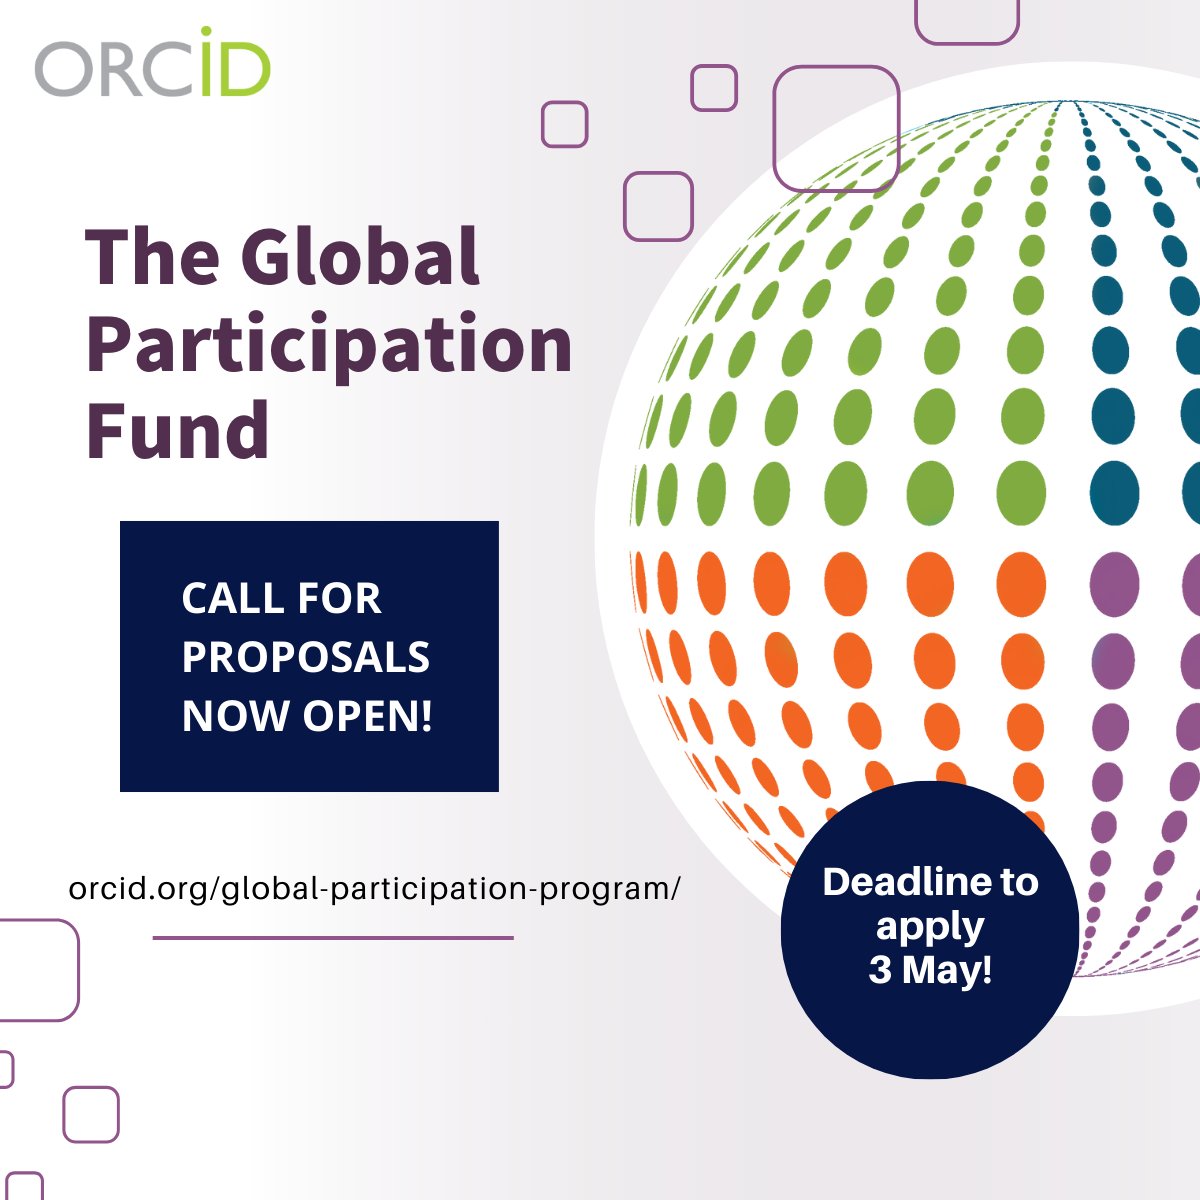 Our latest Global Participation Fund call for proposals is now open through 3 May! Proposing organizations do not need to be current ORCID members. Catch the replay of our recent awardee showcase, read FAQs, and find the application link here ➡️ bit.ly/3Tr9TaI